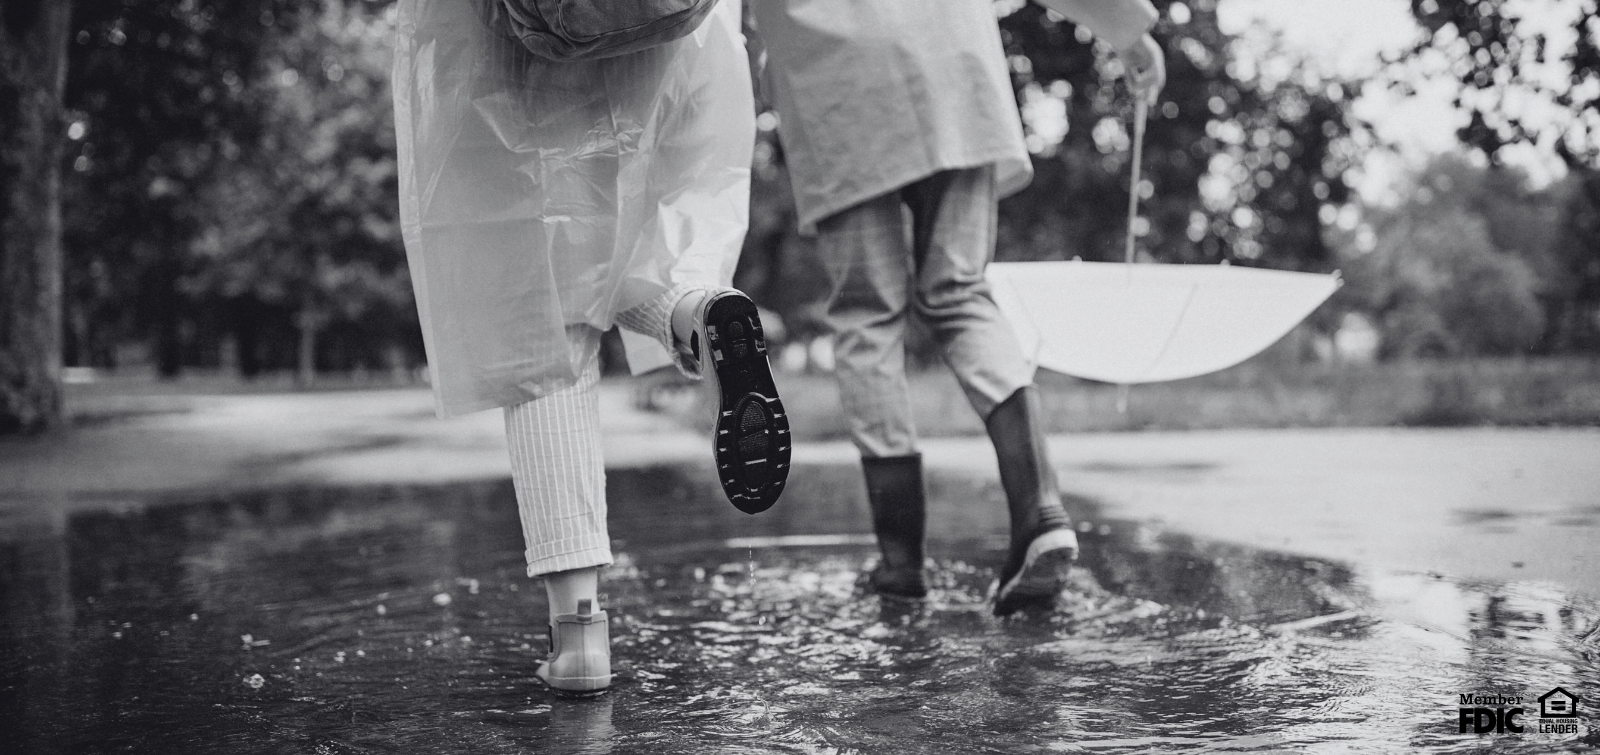 two kids jump in puddles while enjoying the rain outside.